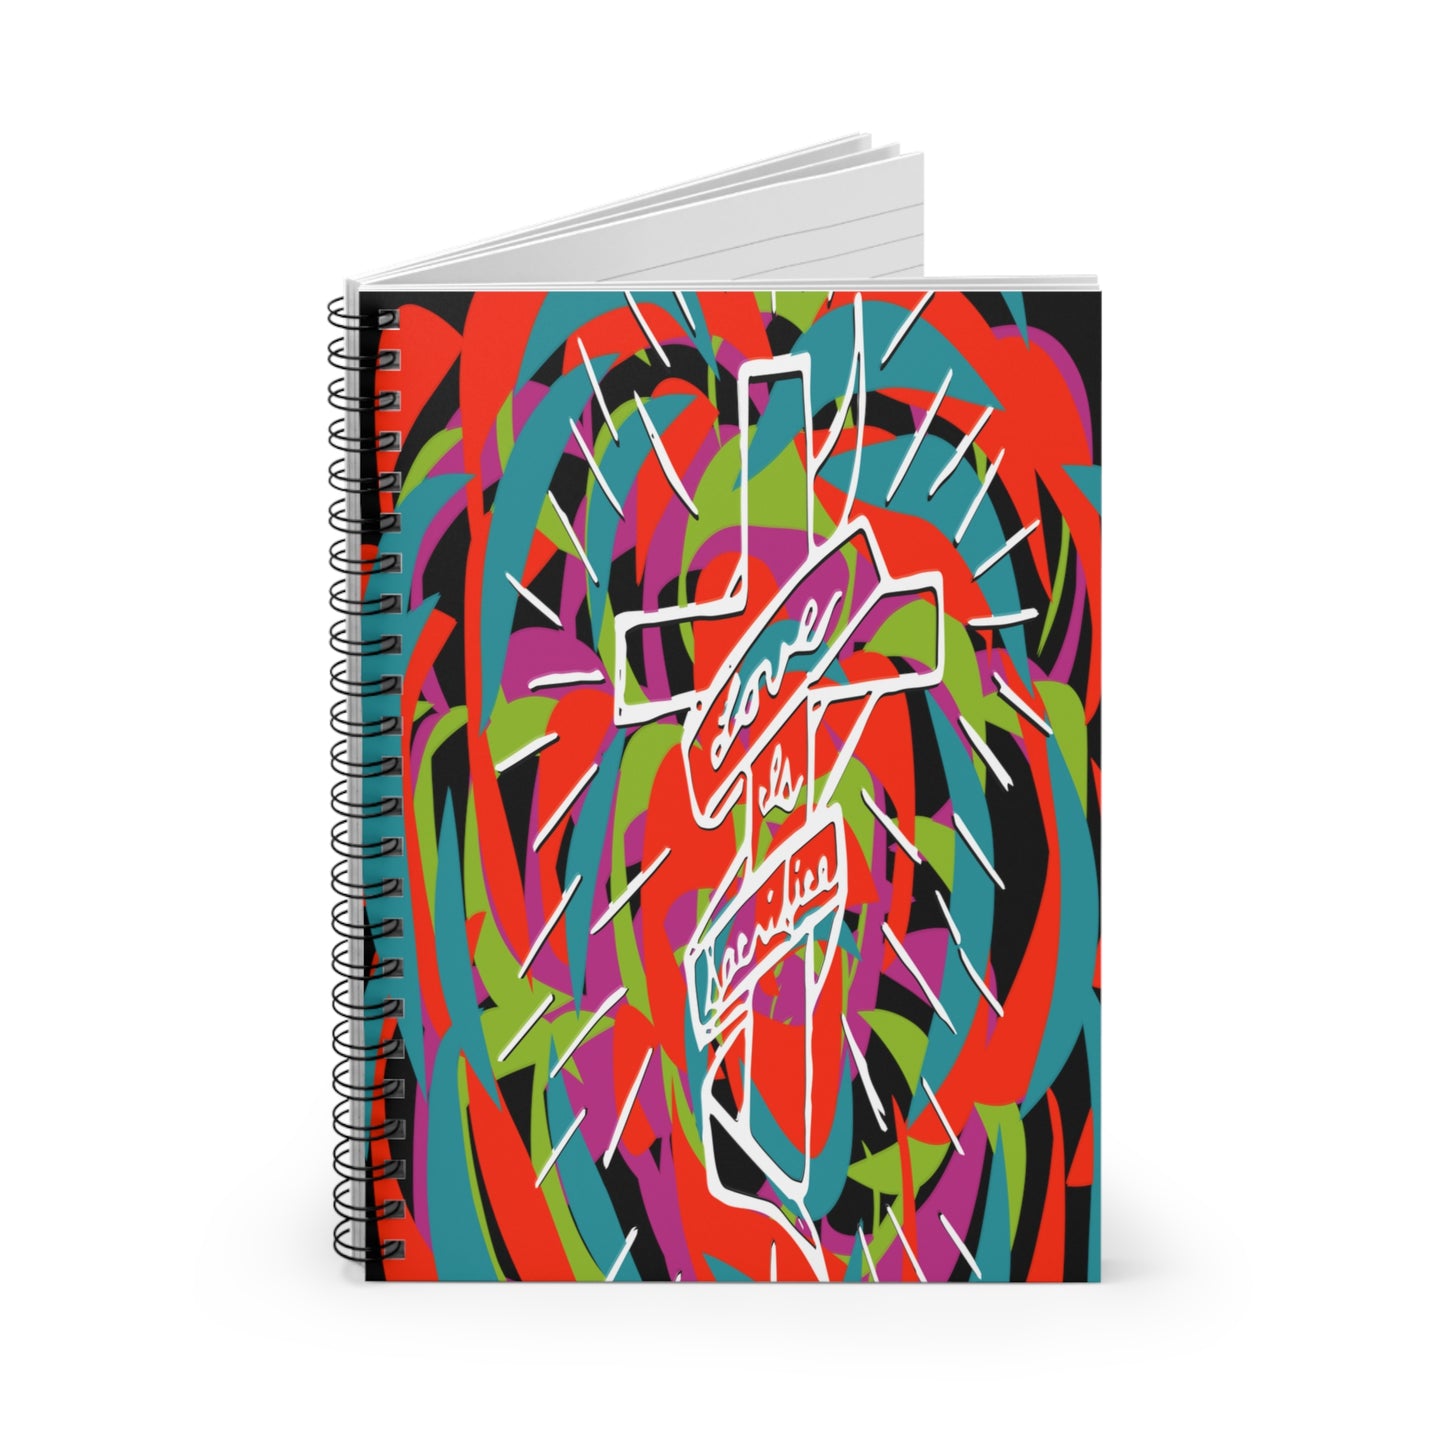 Love is Sacrifice - Spiral Notebook - Ruled Line